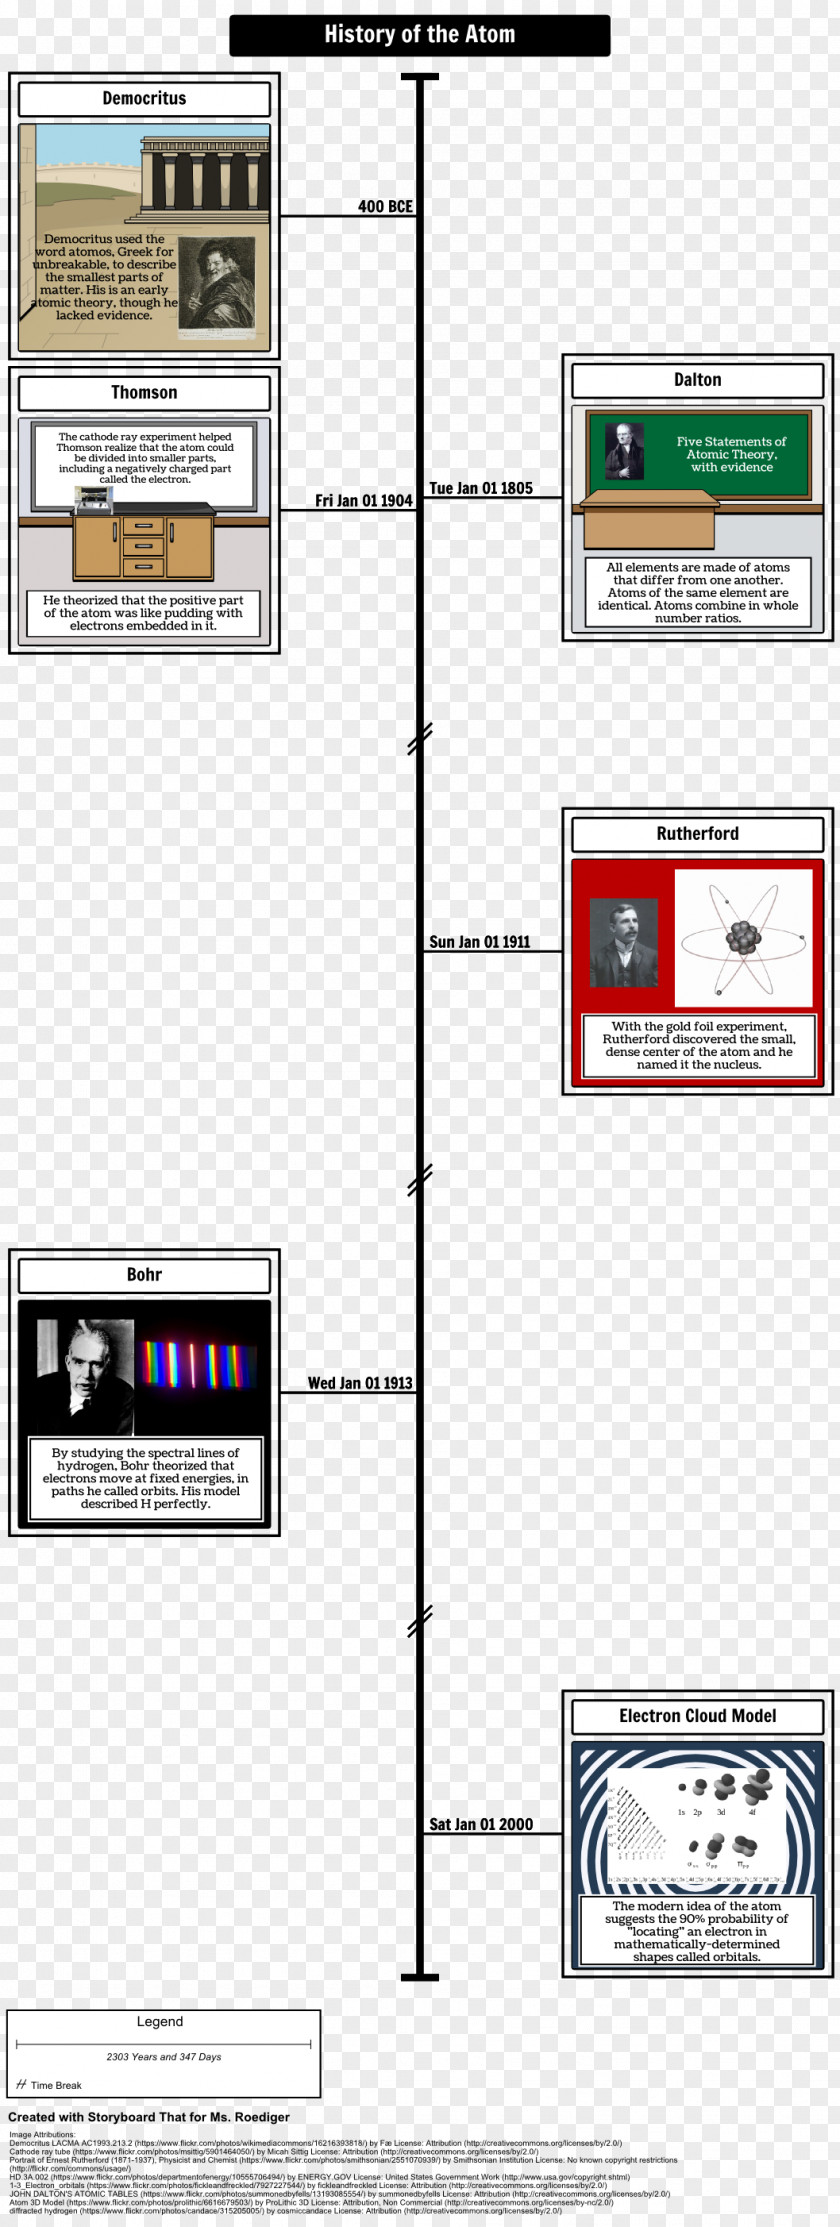 Timeline Atomic Theory History Plum Pudding Model Cathode Ray PNG